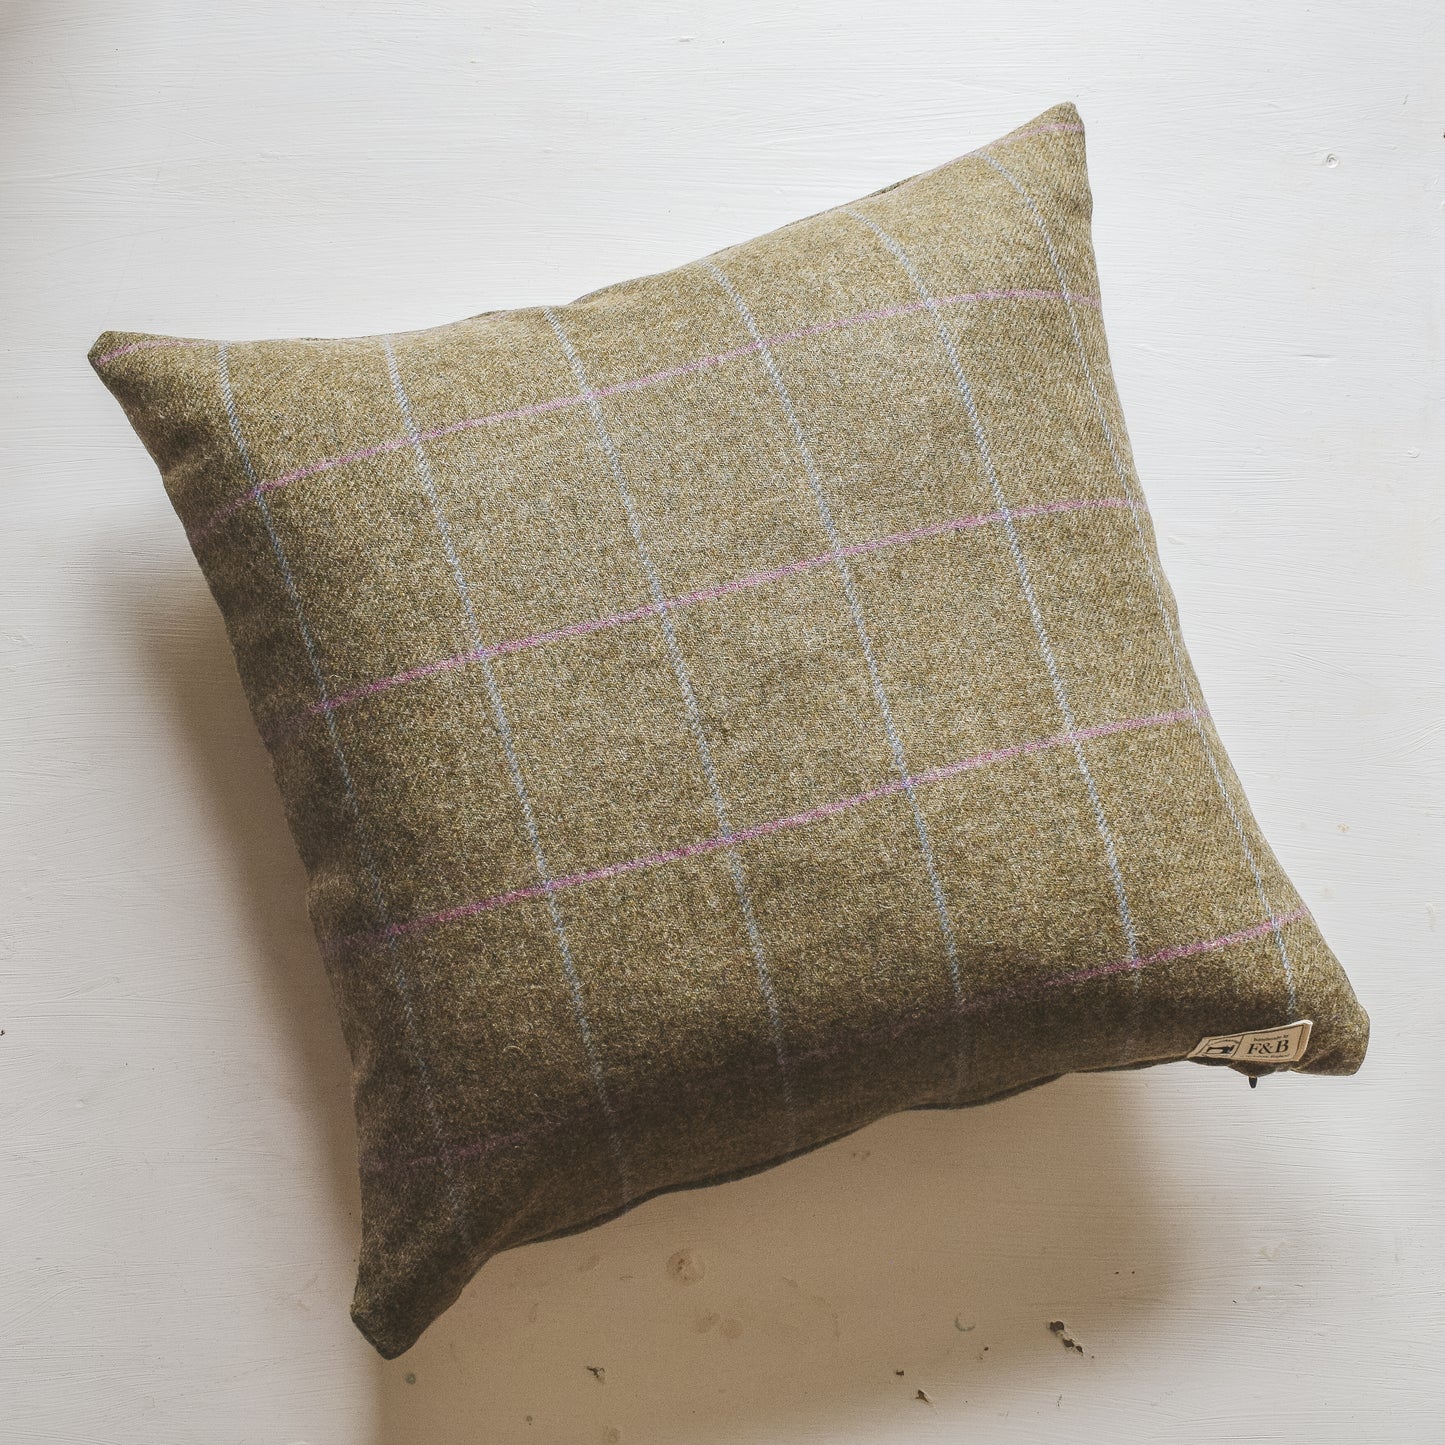 Light Green Blue and Pink Check Tweed Cushion Handmade by F&B International Country Home Decor - Country Living - Tweed Cushion